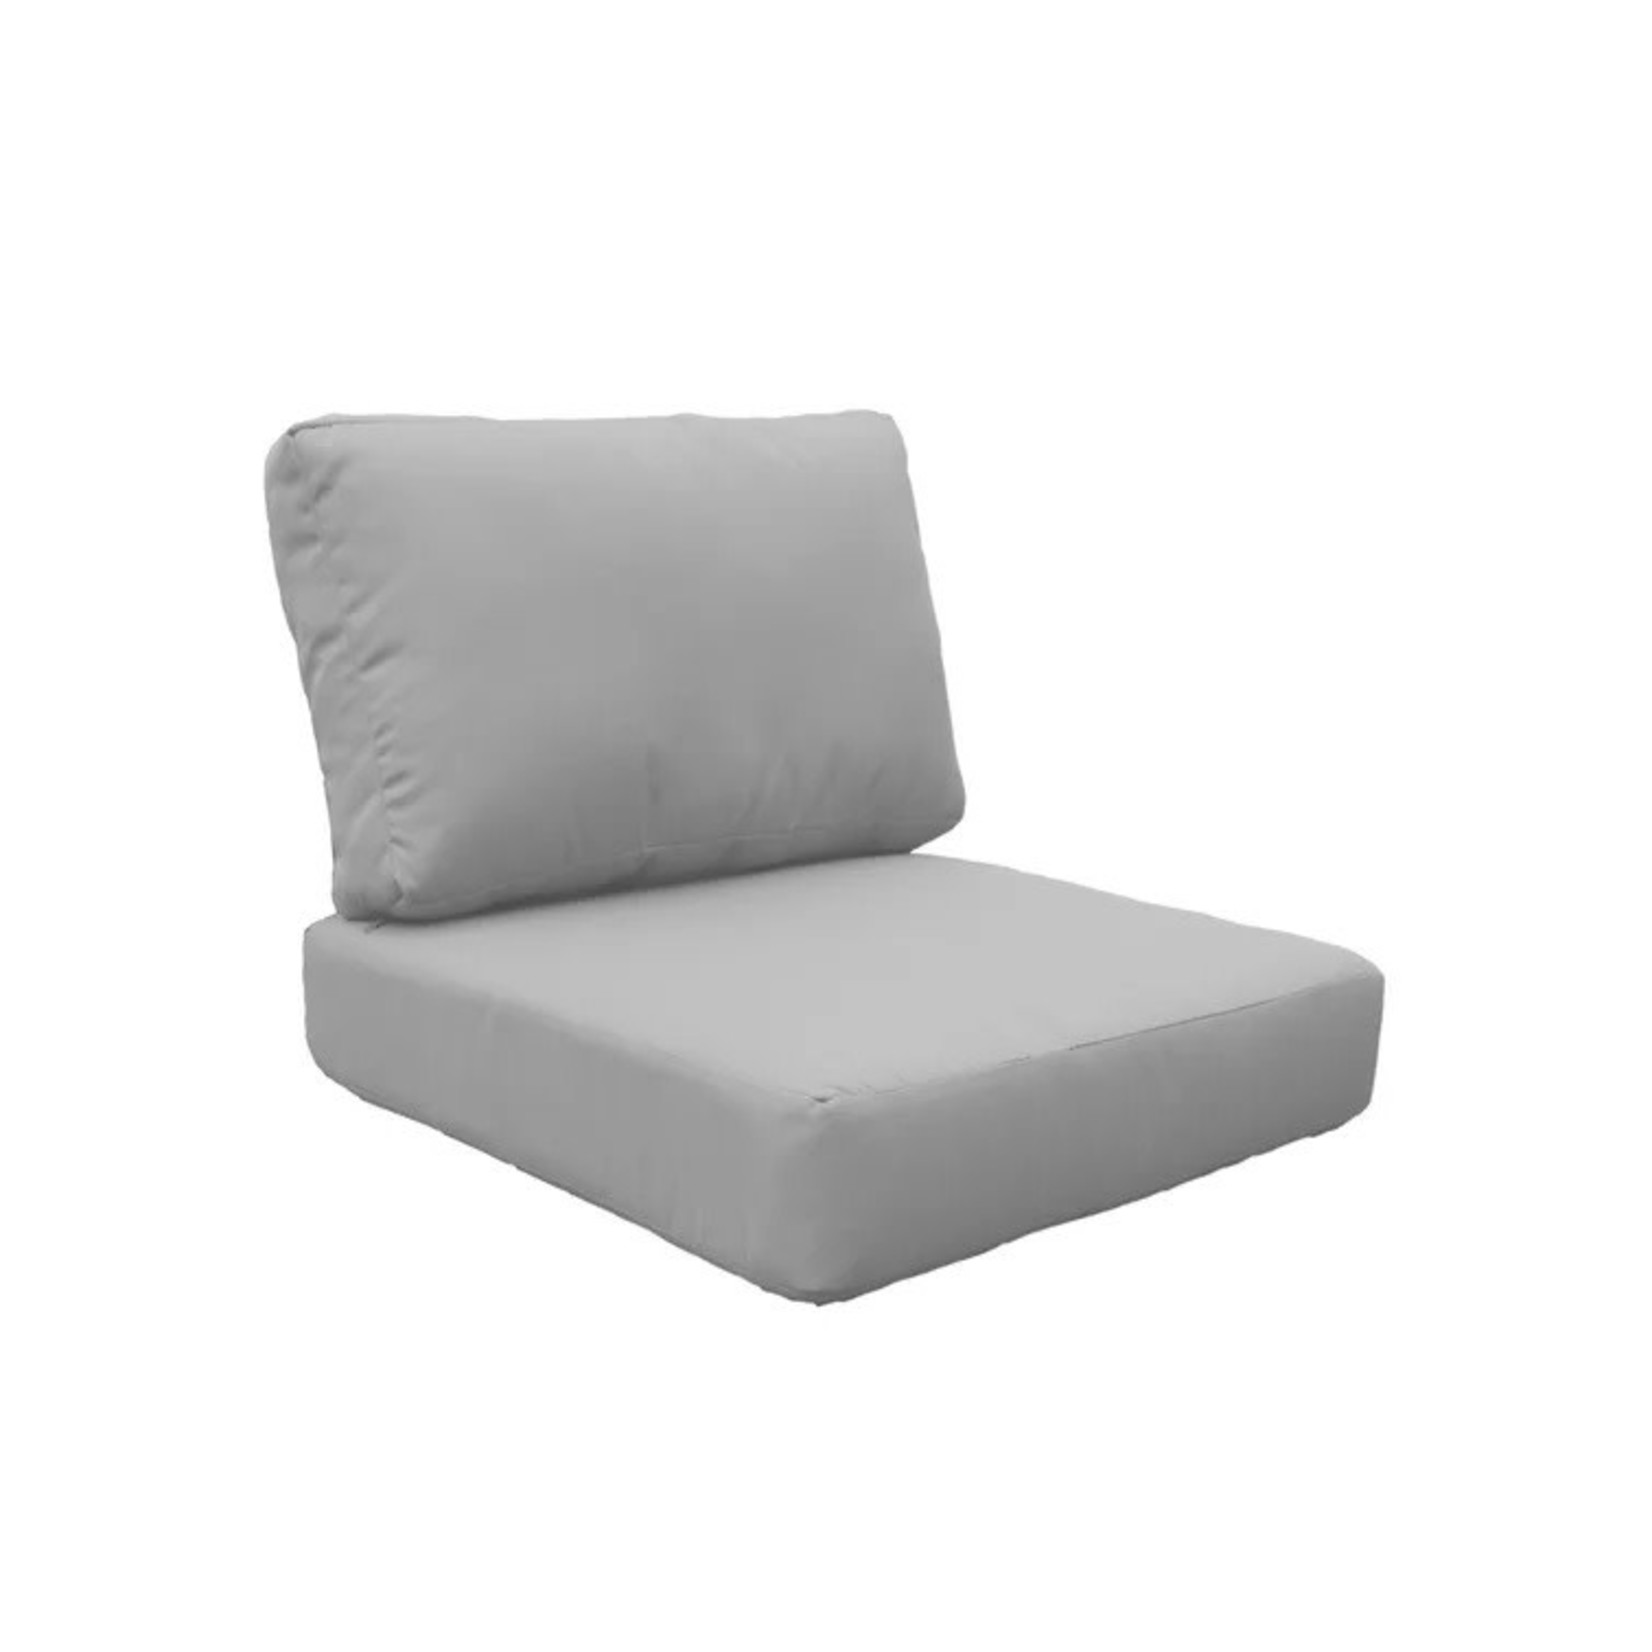 *Indoor/Outdoor Lounge Chair Cushion Grey - Seat & Back - Ink mark on back cushion